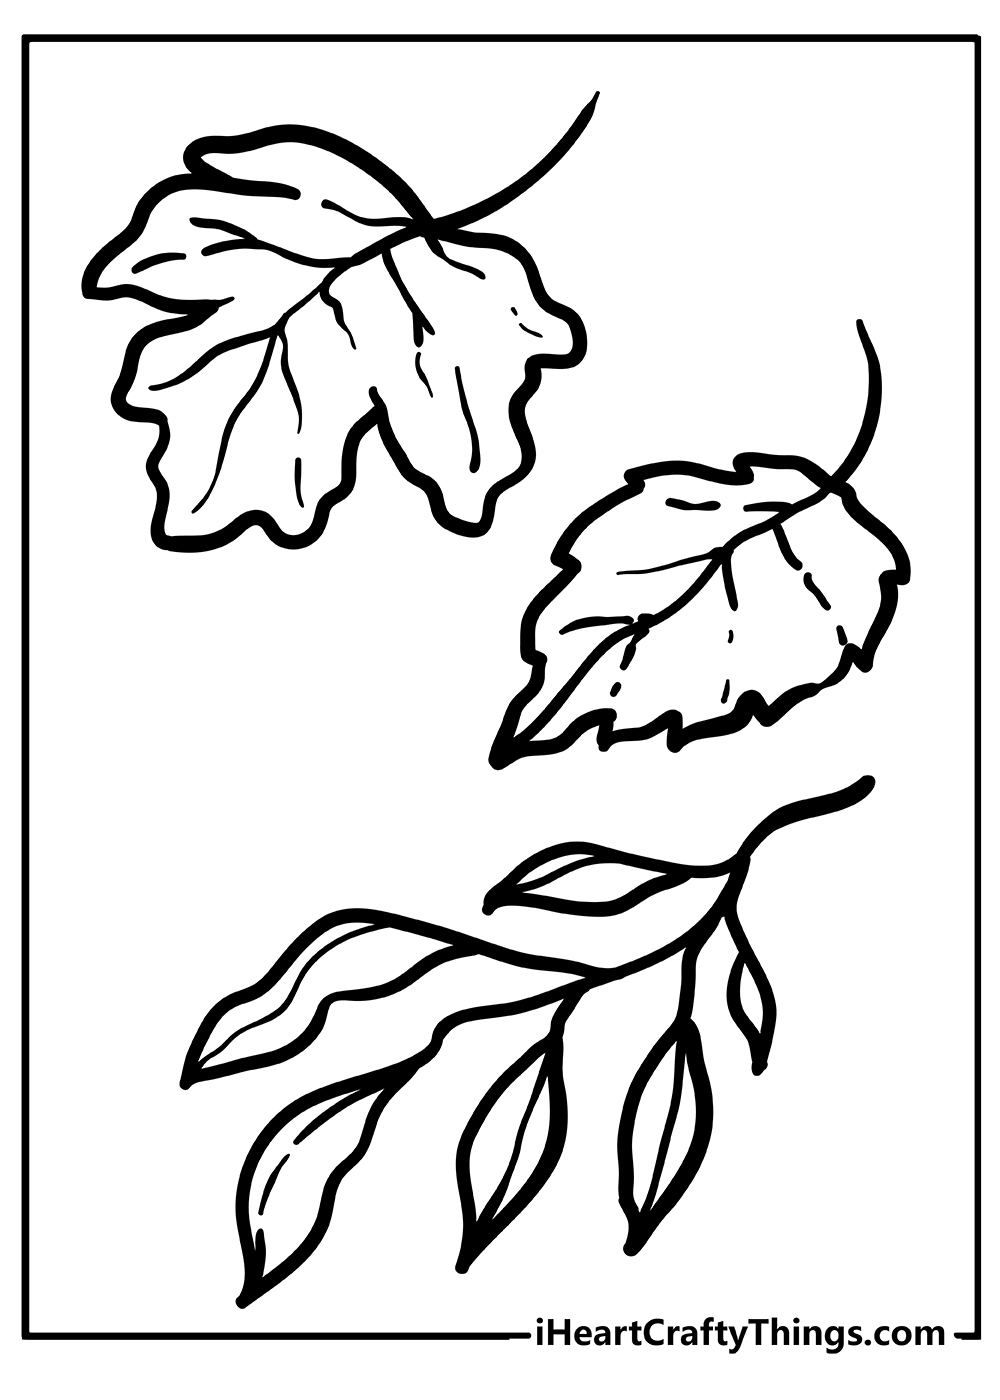 Fall Leaves Coloring Pages for adults free printable